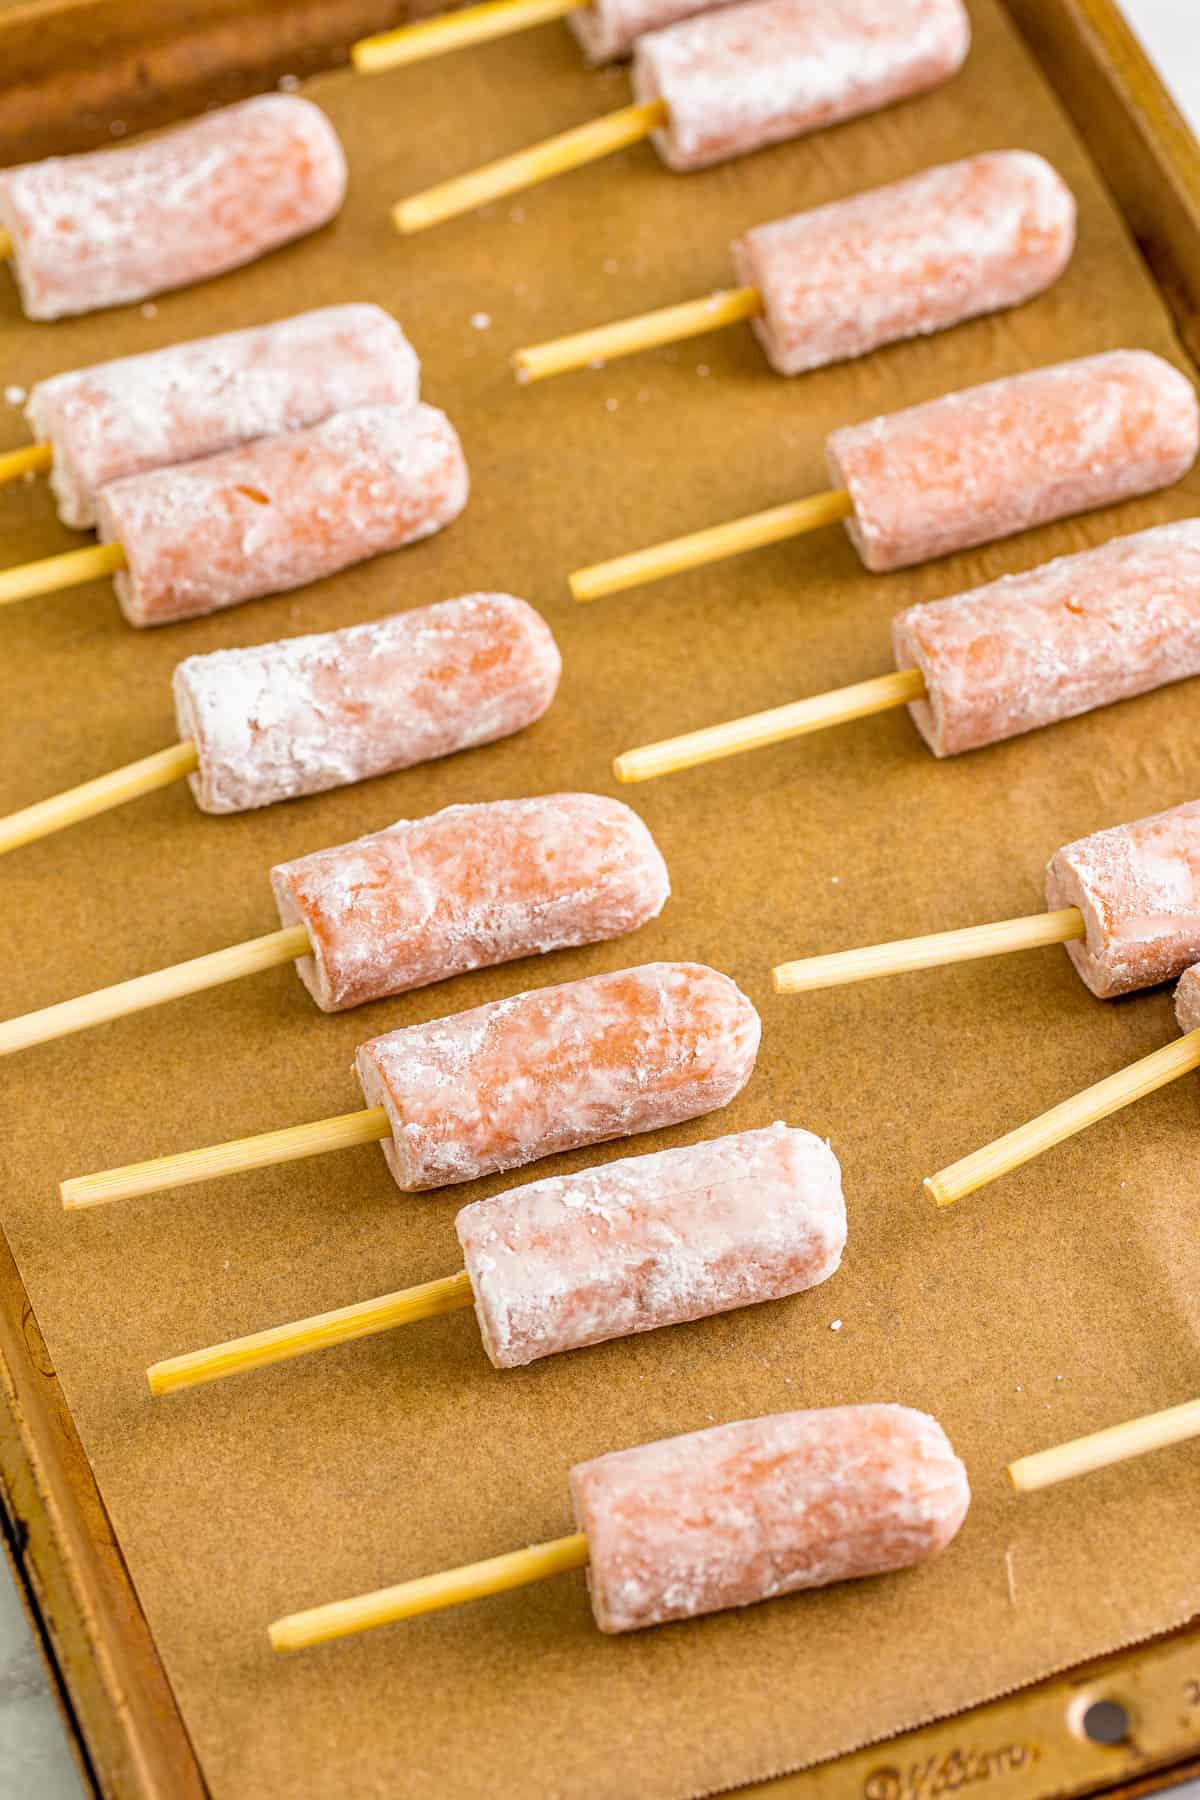 Halved hot dogs with wooded skewers on lined baking sheet.